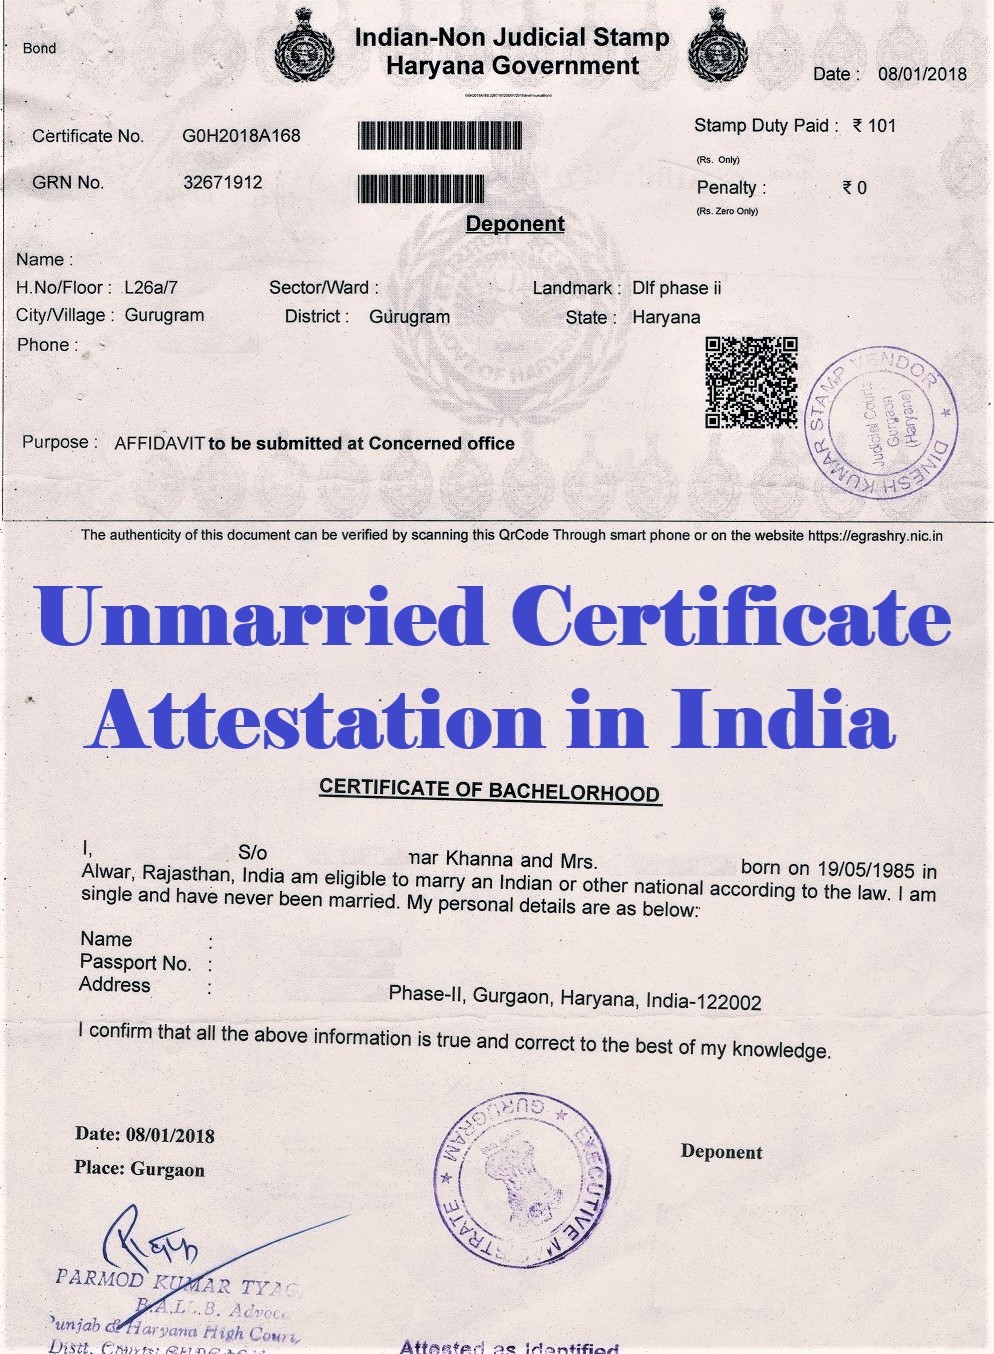 Unmarried Certificate Attestation from Gabon Embassy